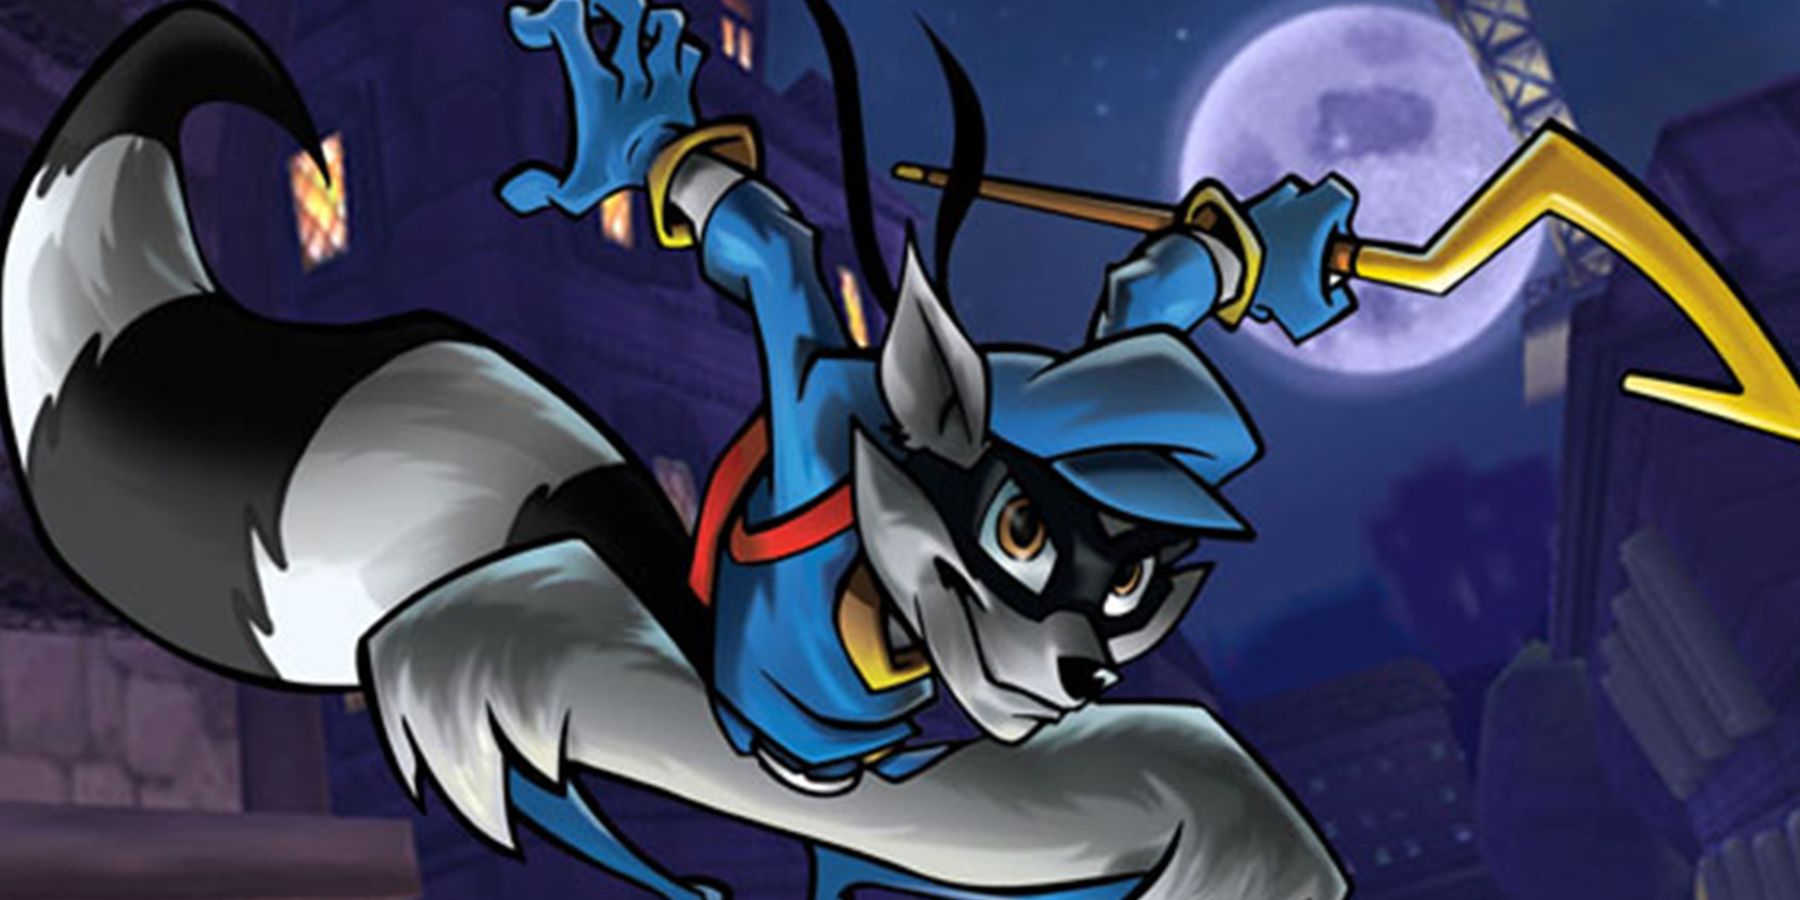 Sly Cooper Trilogy - PS2 & PS3 Differences 